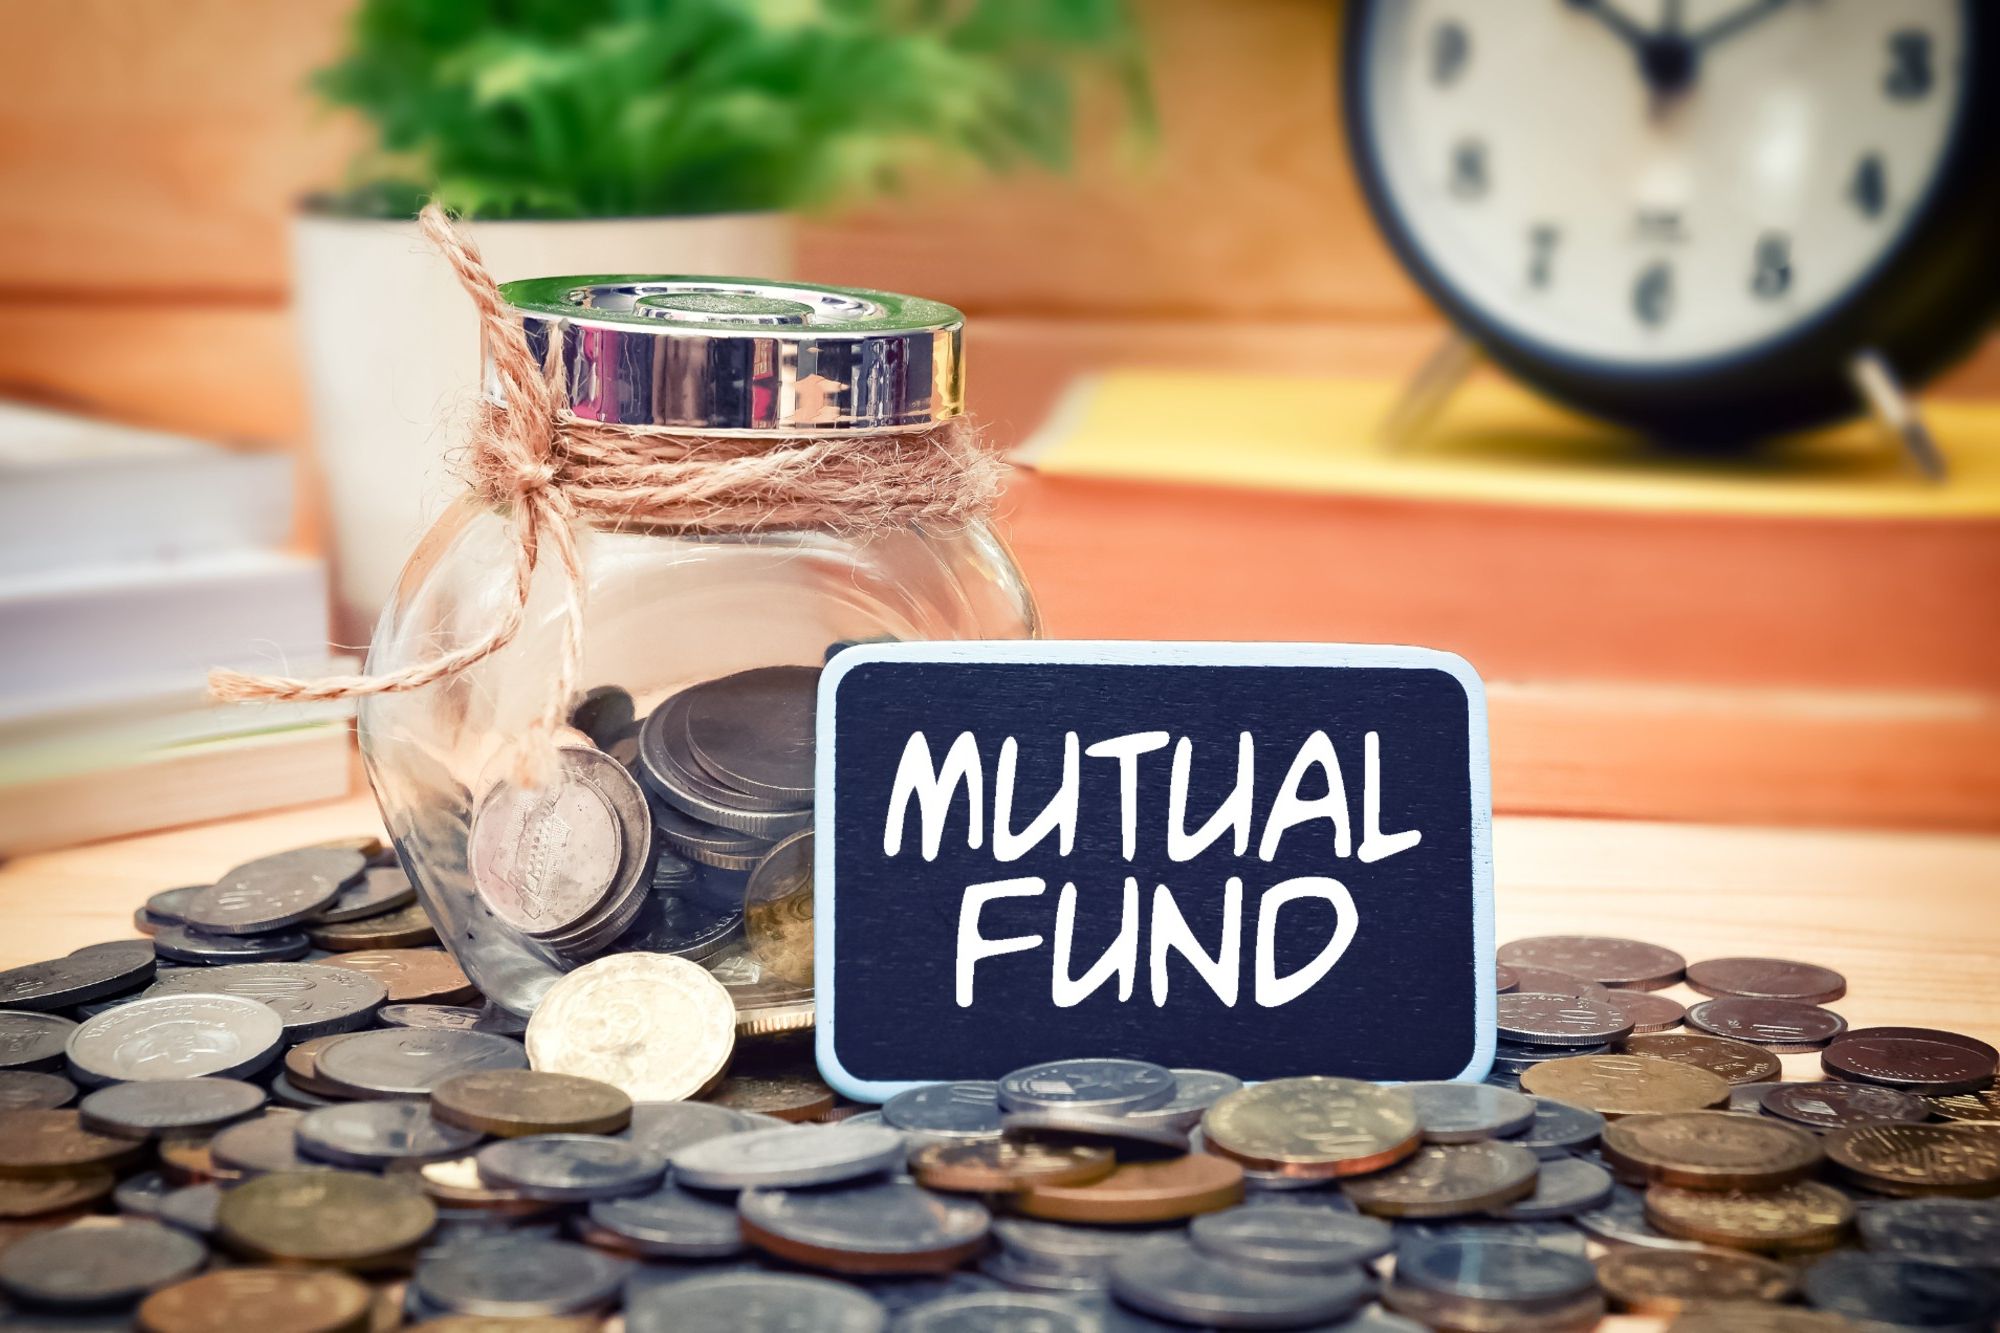 Best 5 - Top Performing Mutual Funds in India in Hindi - These funds gave 5 times return in 3 months as compared to bank FD | इन म्‍यूचुअल फंड ने 3 महीने में बैंक FD से 5 गुना अधिक रिटर्न दिया !